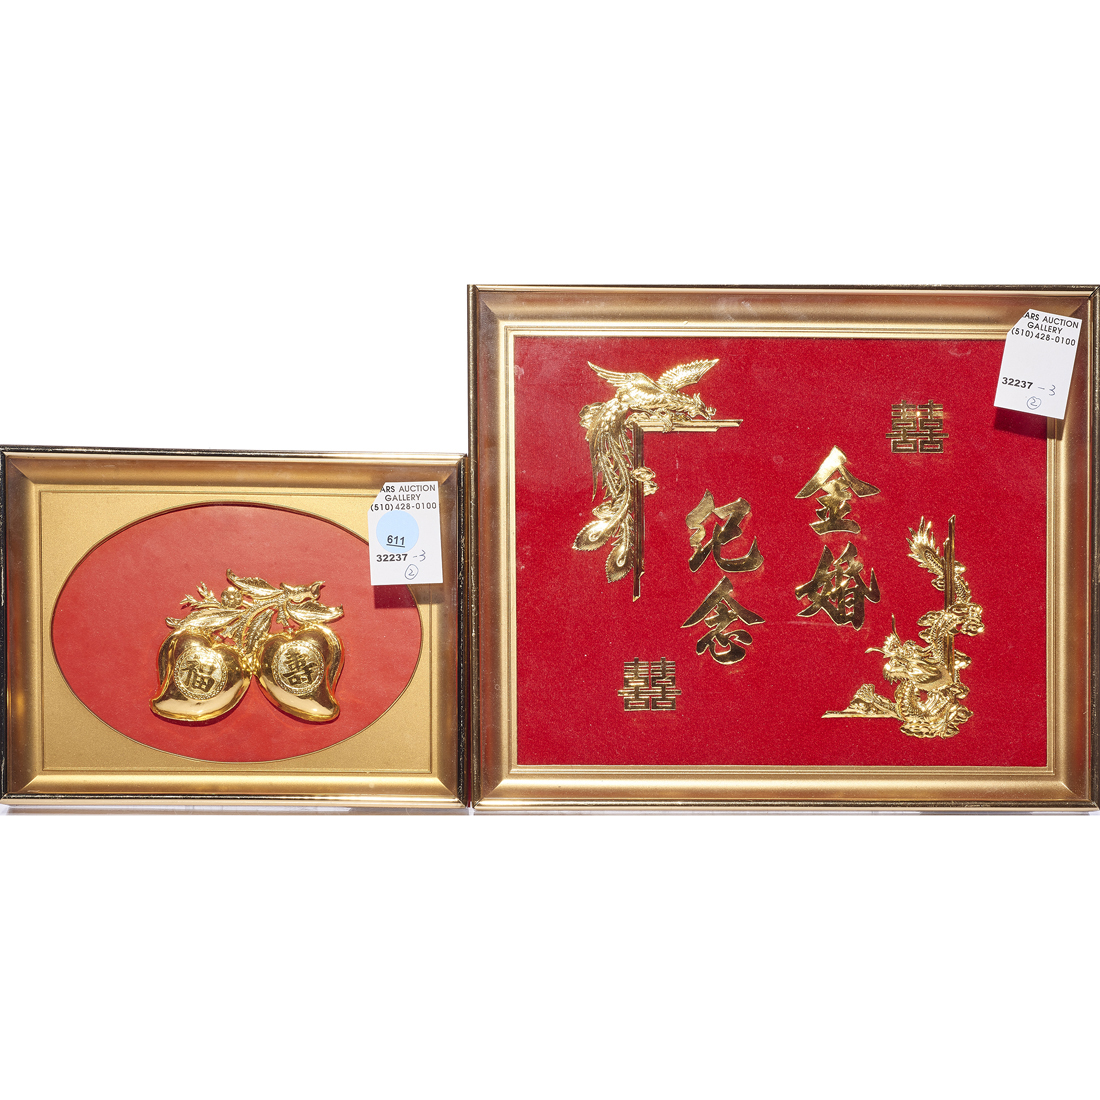  LOT OF 2 CHINESE GOLD FOIL PICTURES 3a1f59